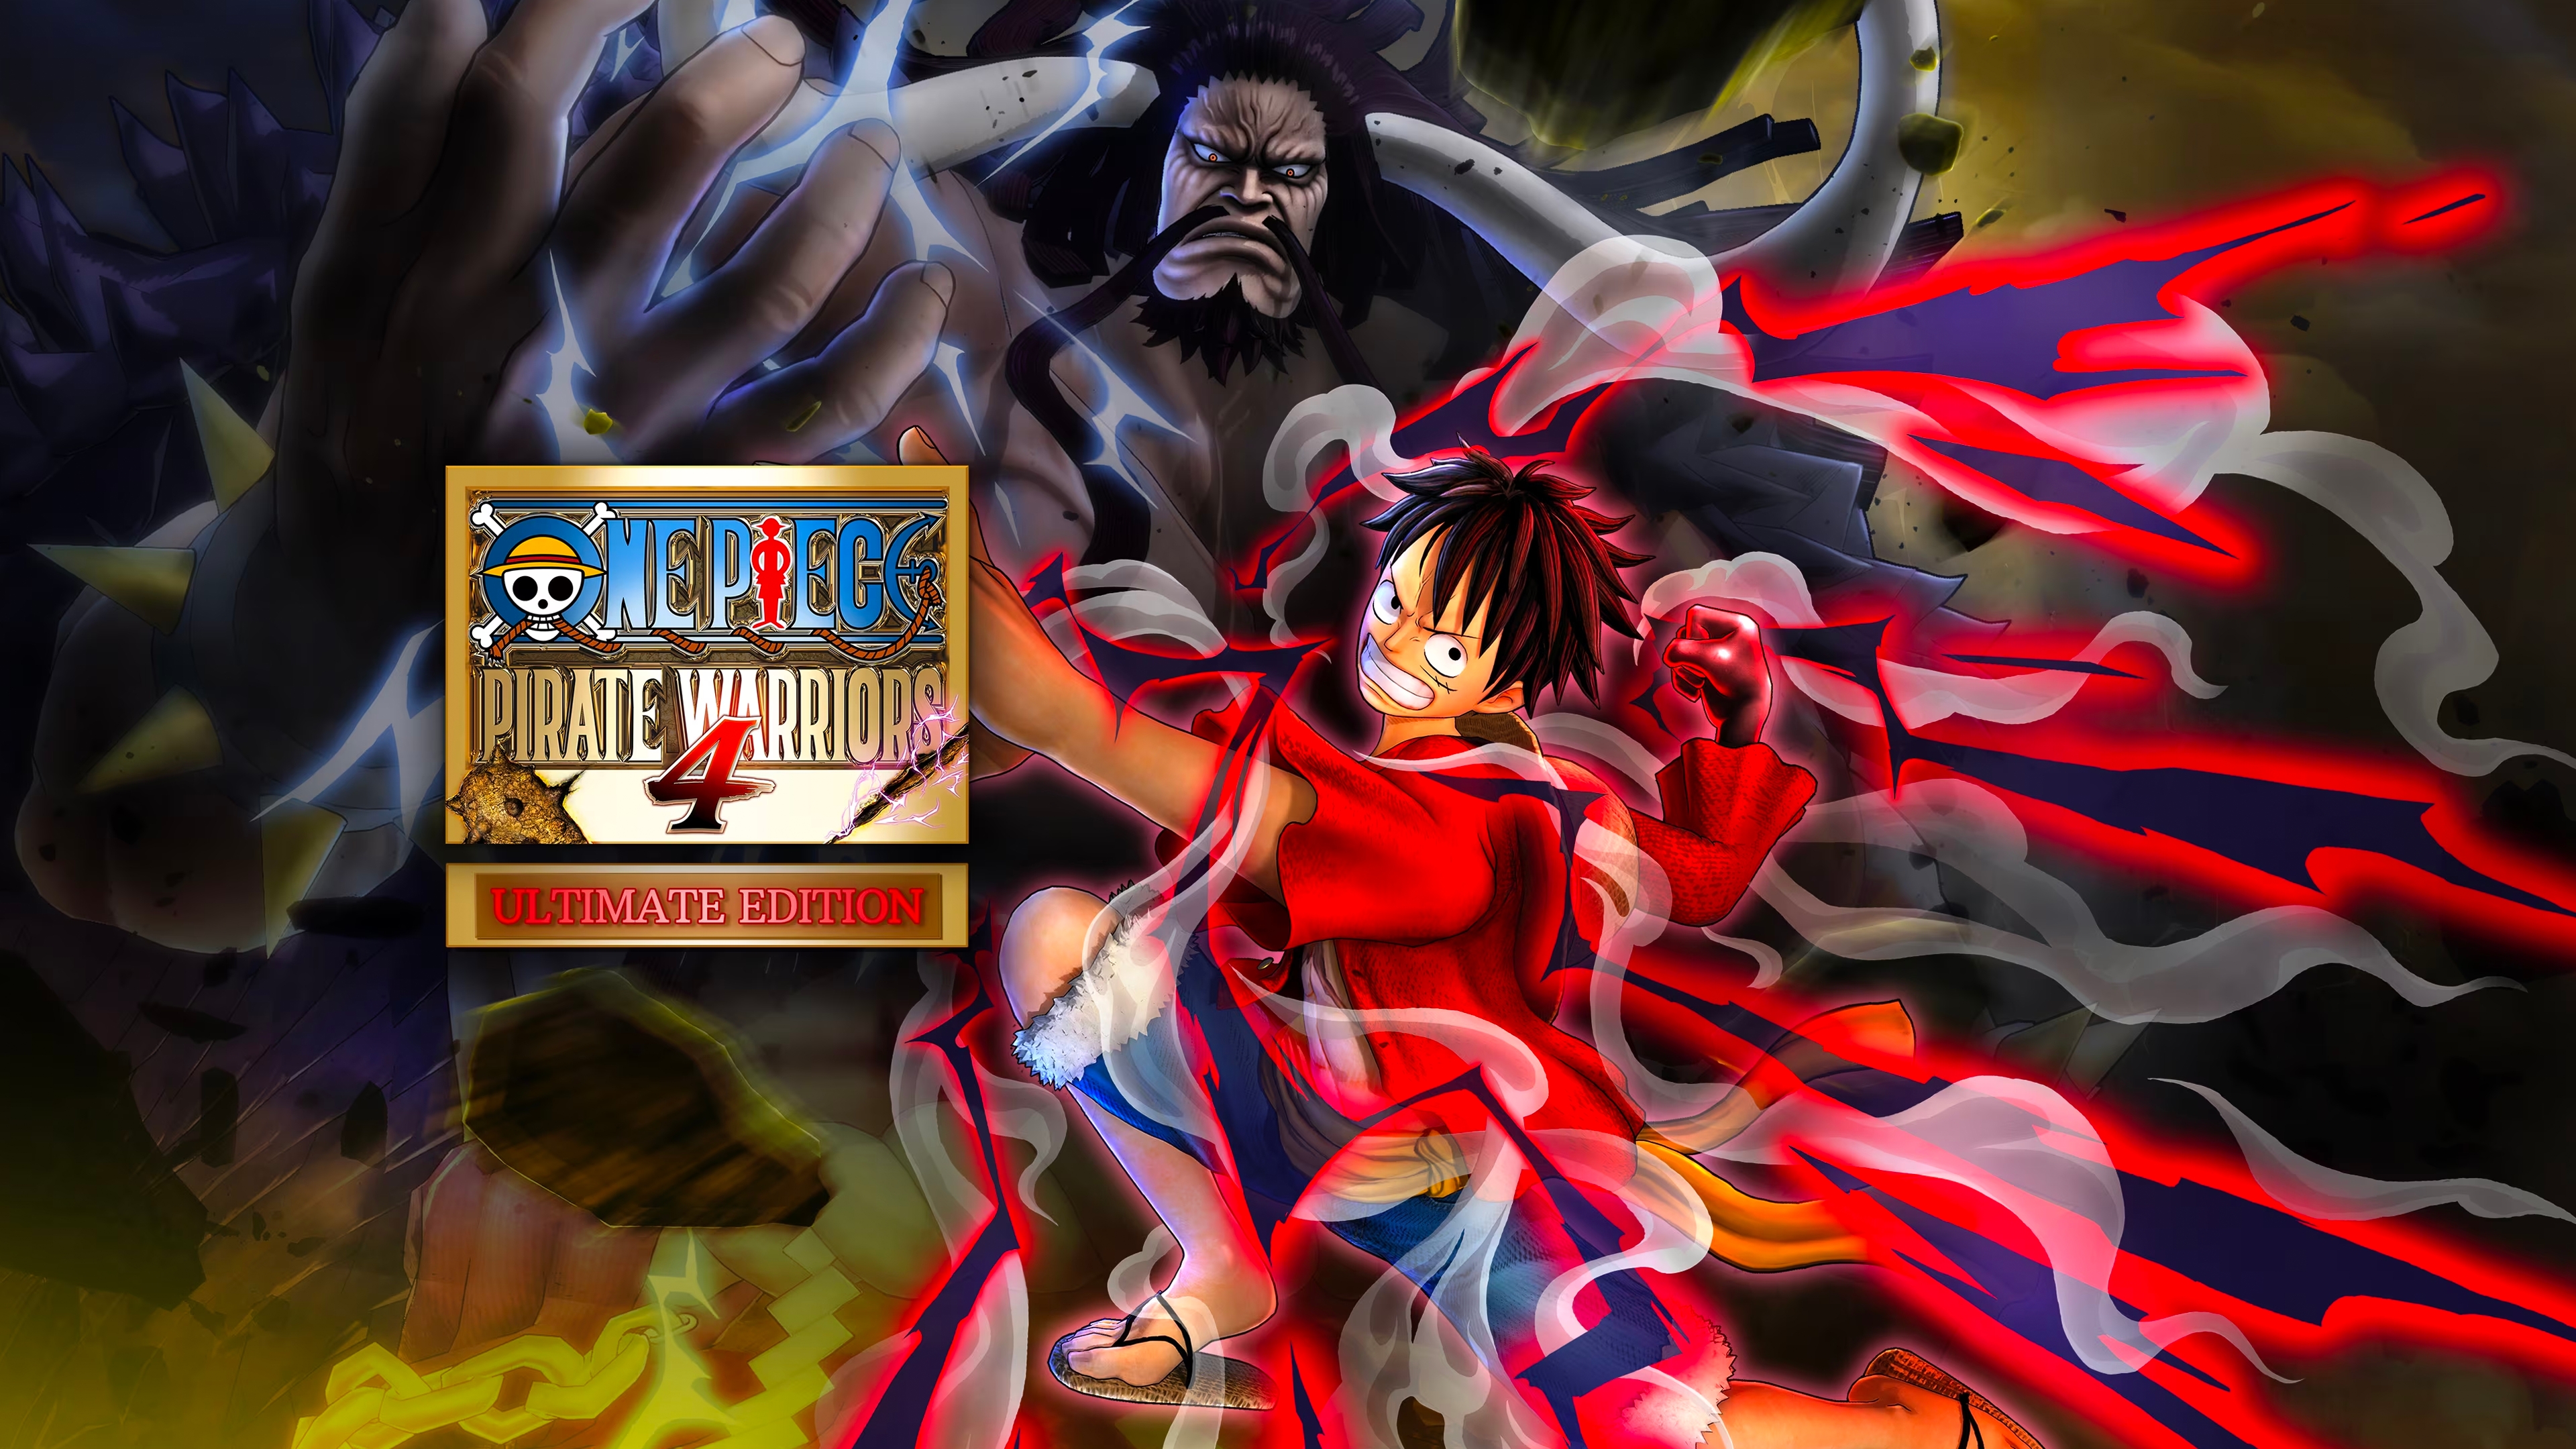 https://gaming-cdn.com/images/products/15027/orig/one-piece-pirate-warriors-4-ultimate-edition-ultimate-edition-pc-game-steam-cover.jpg?v=1697644479